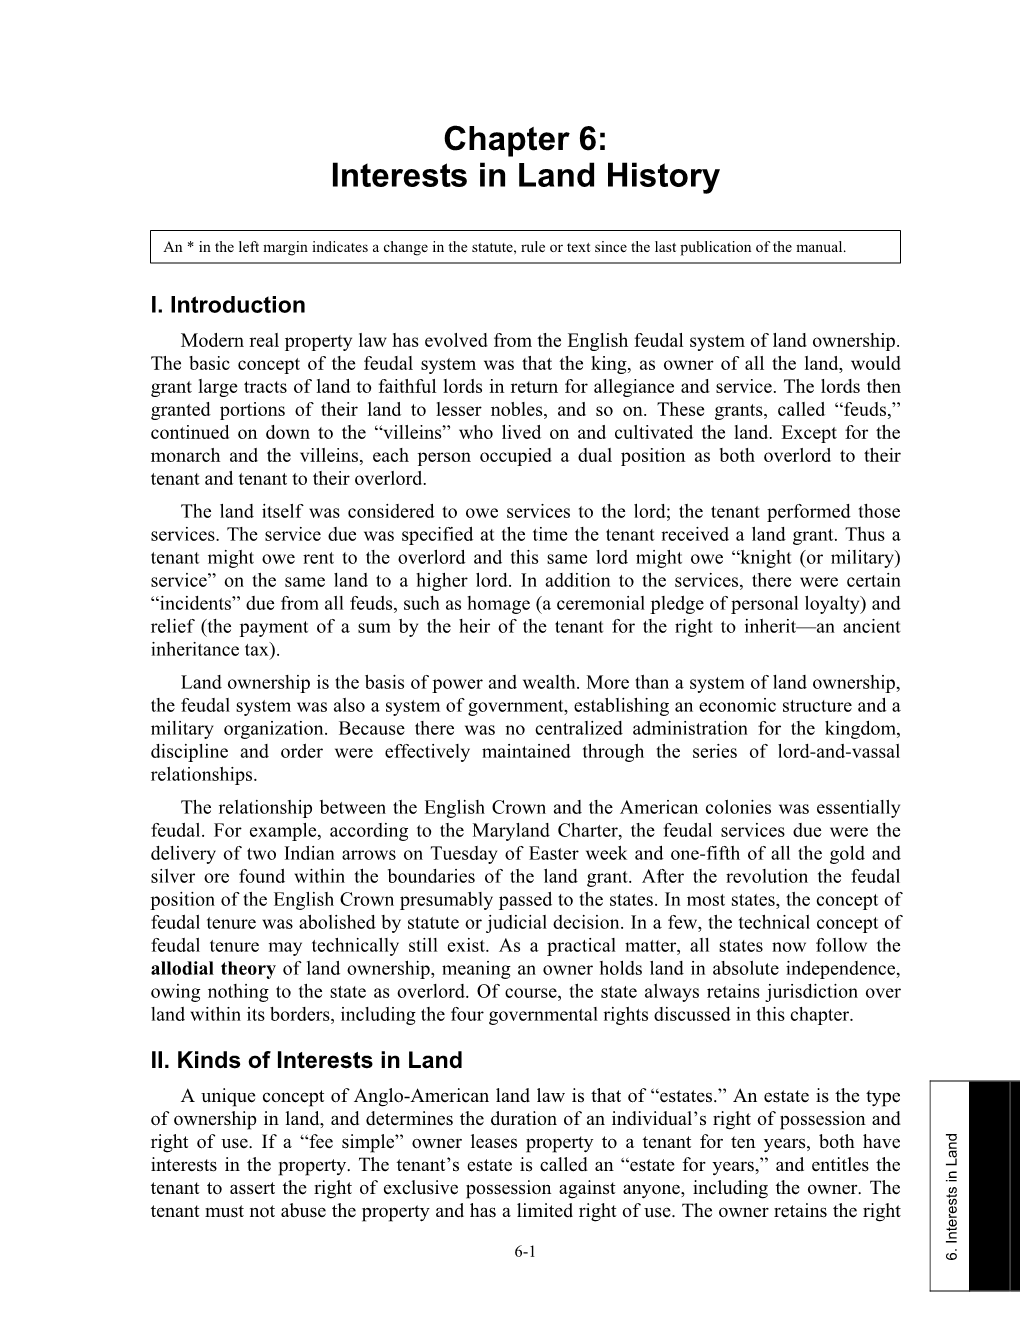 Chapter 6: Interests in Land History